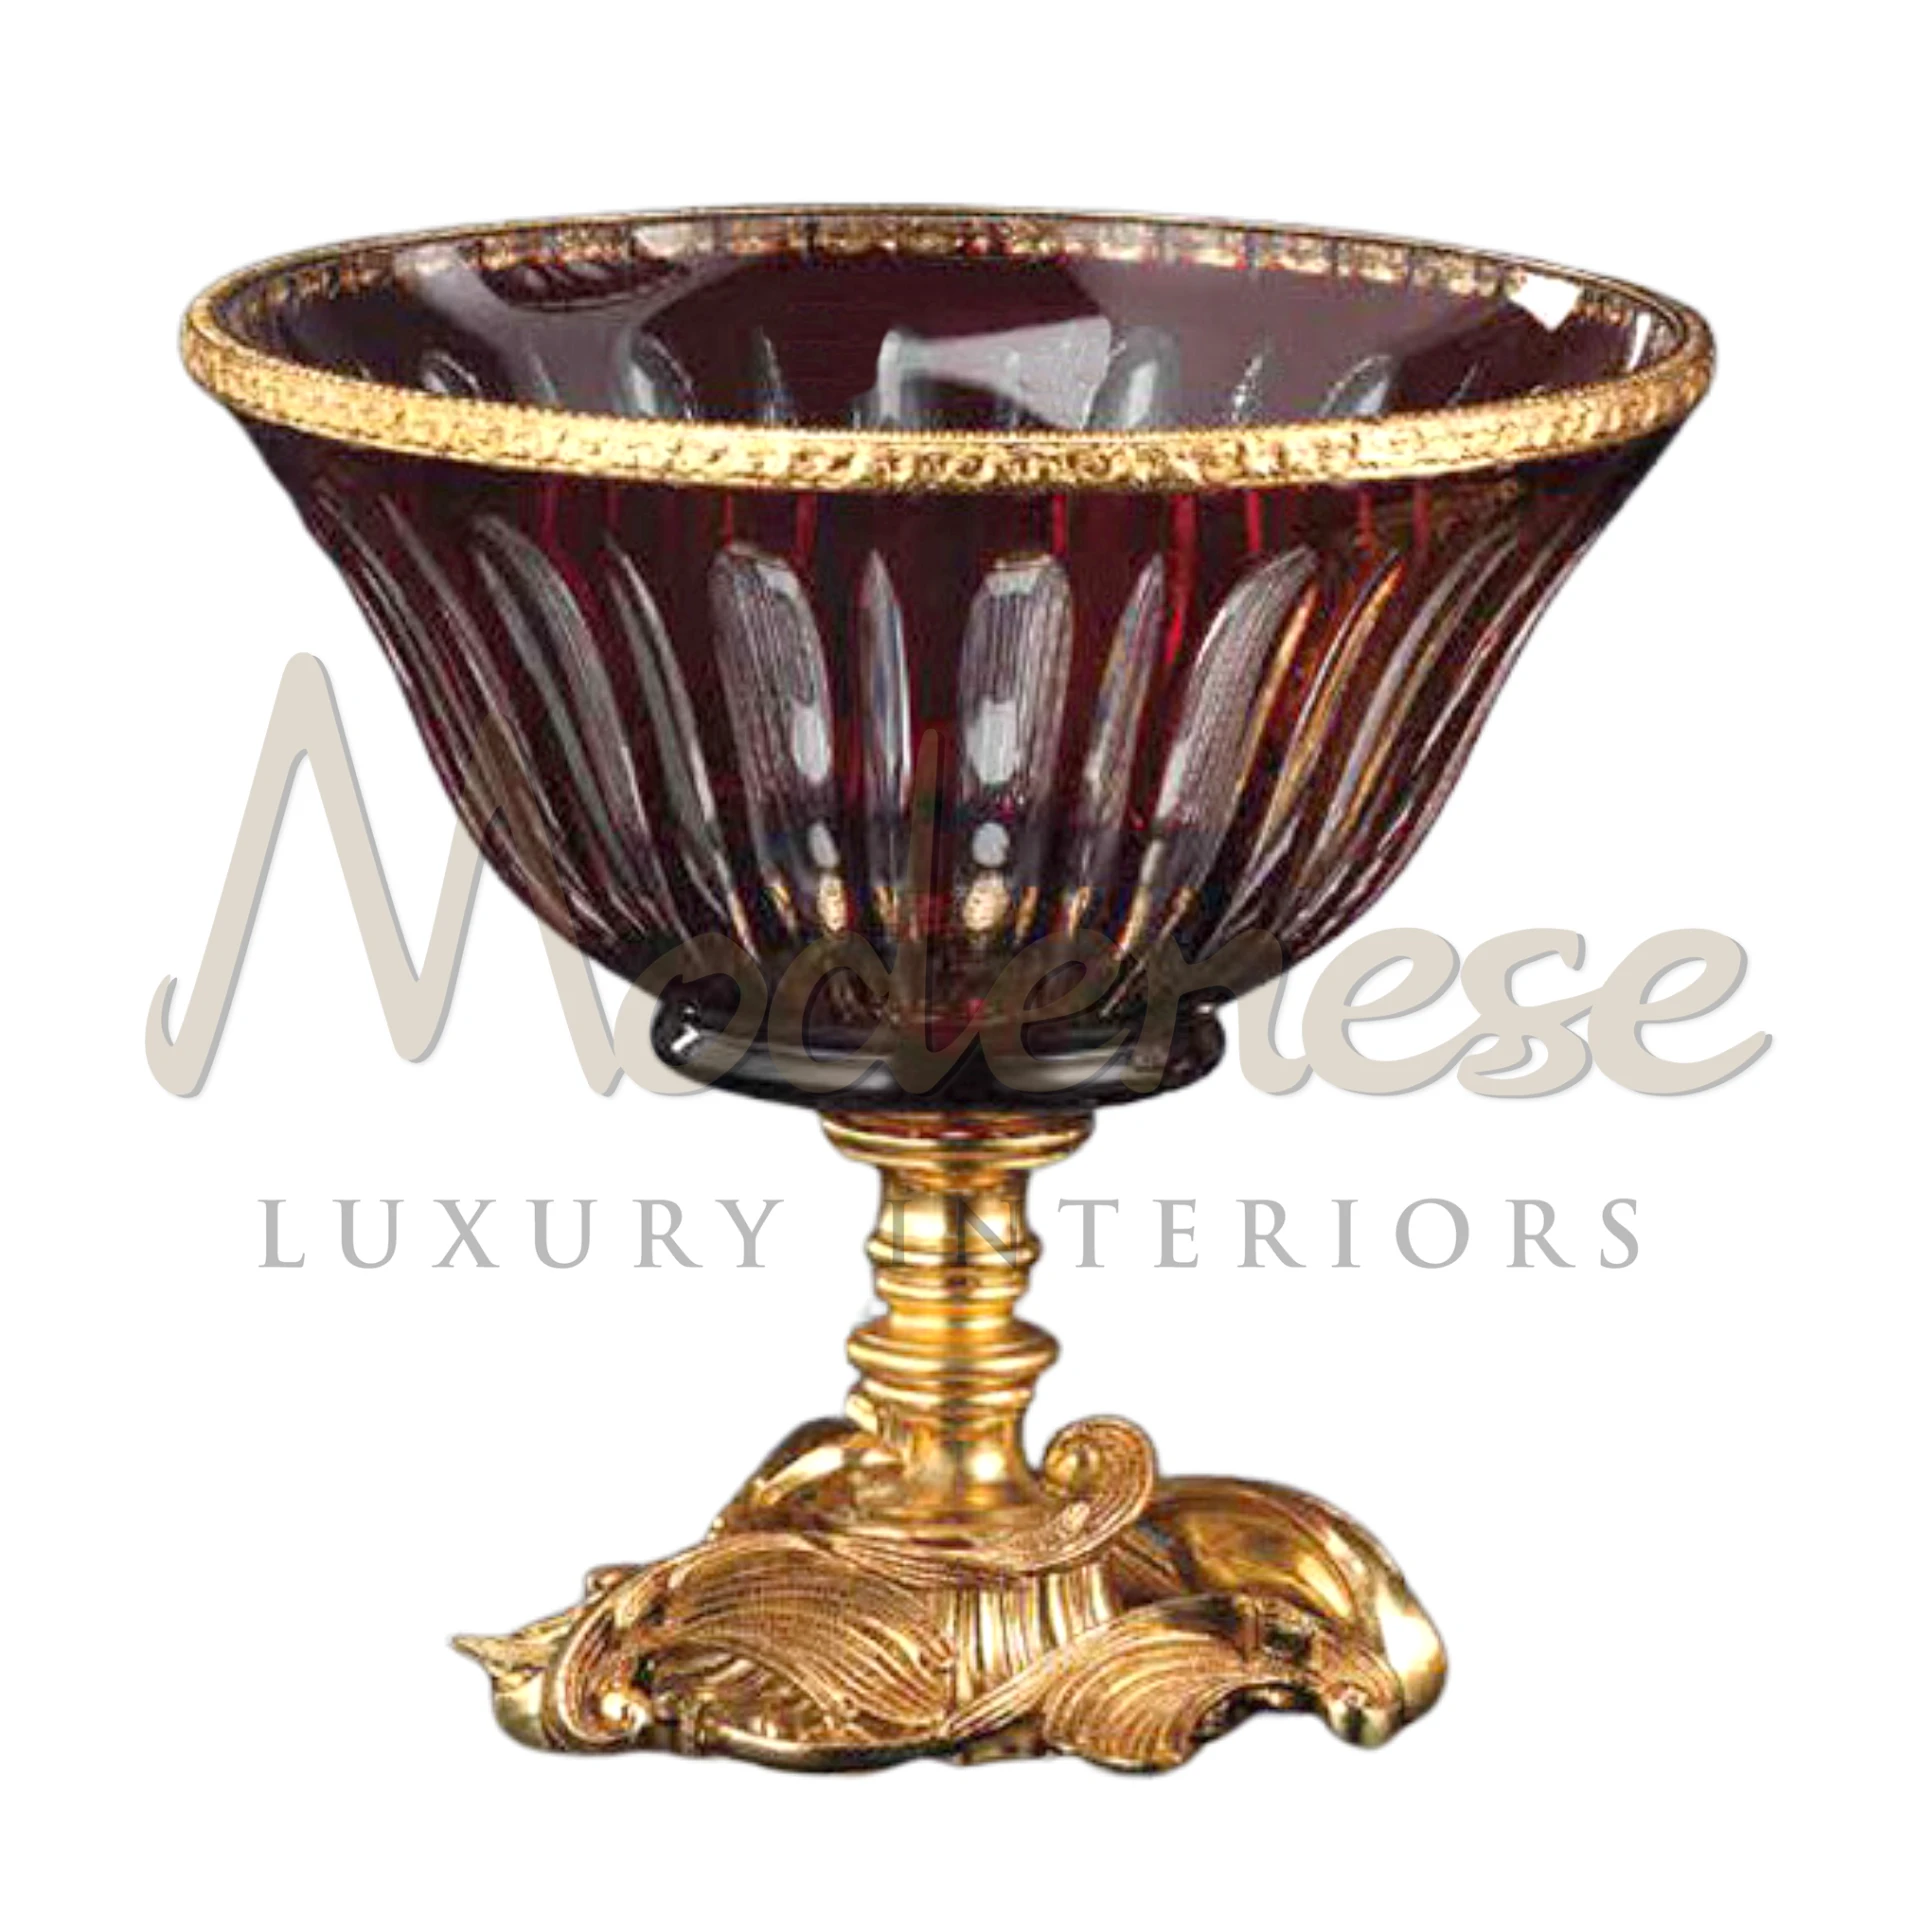 Luxurious Imperial Dark Glass Bowl in high-quality crystal, ideal for enhancing interior design with its deep, dramatic color and sophisticated style.






